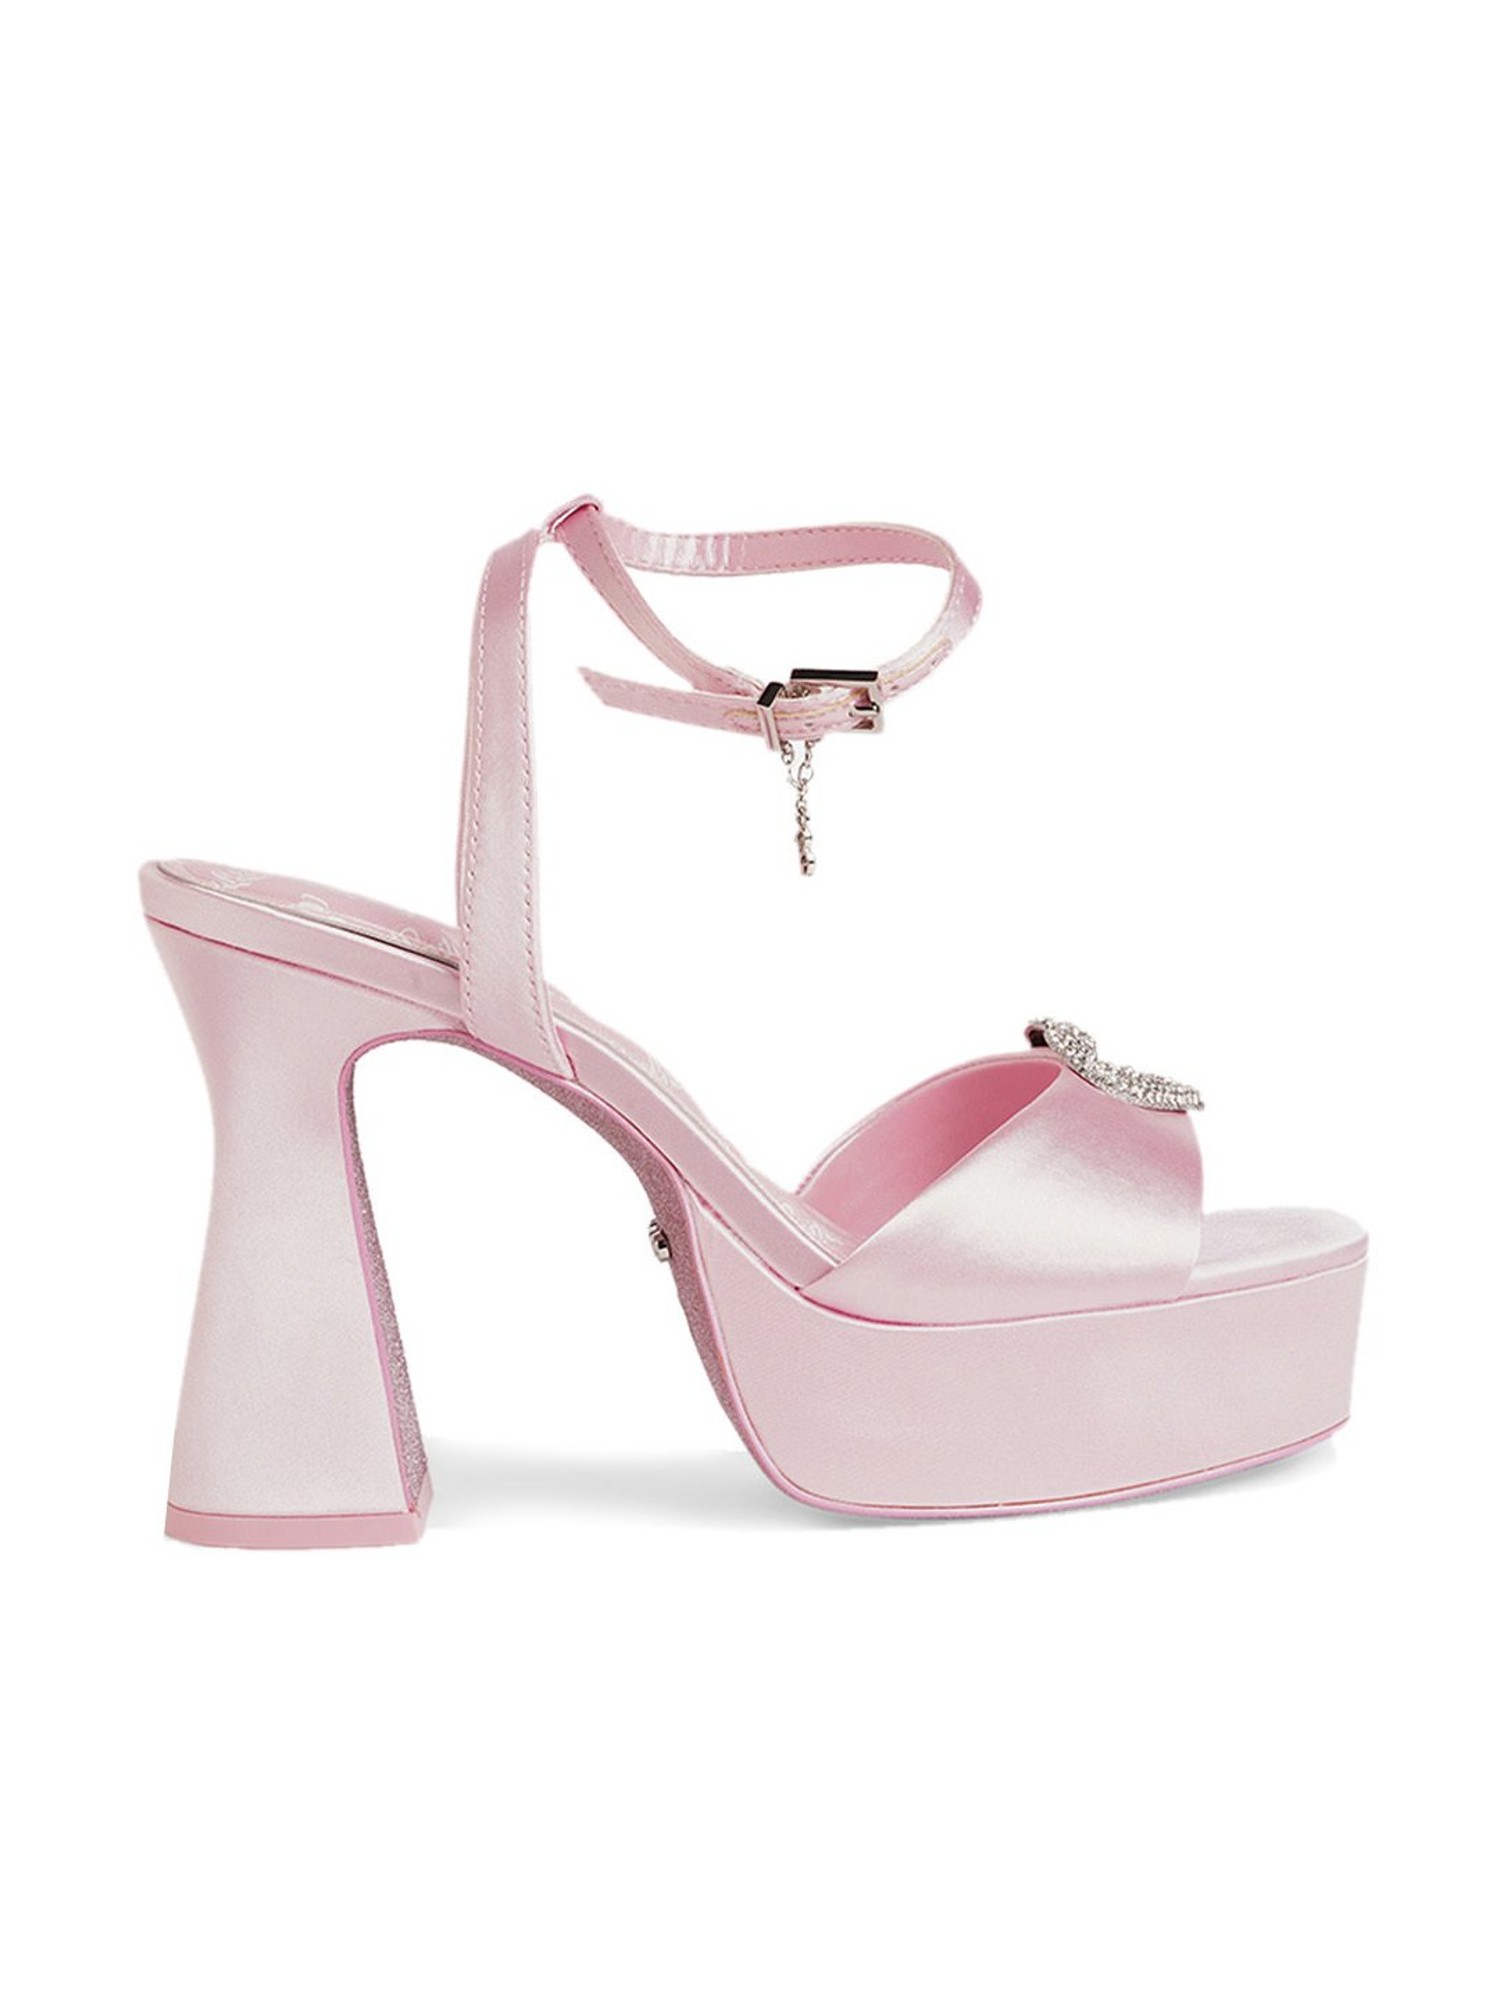 Platform Sandals in Pink  457 products  FASHIOLAin